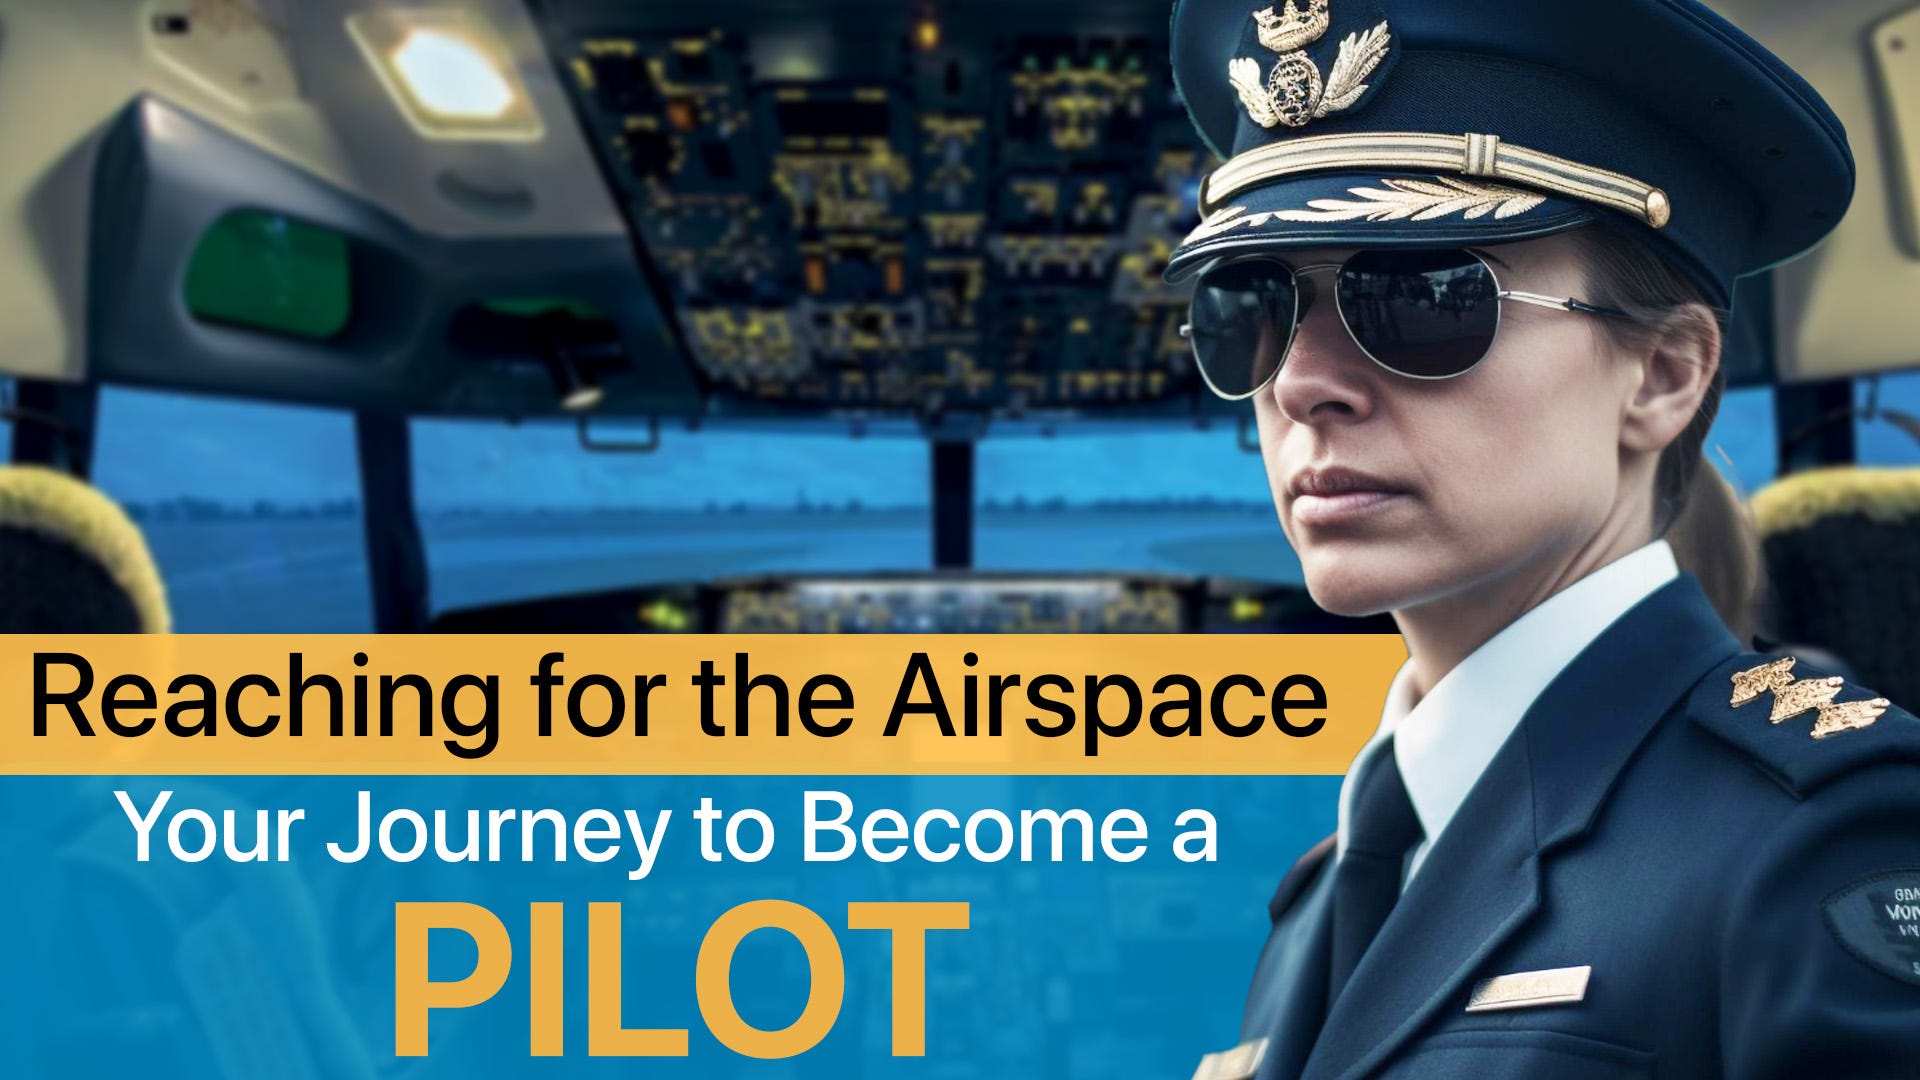 Reaching for the Airspace: Your Journey to Become a Pilot.